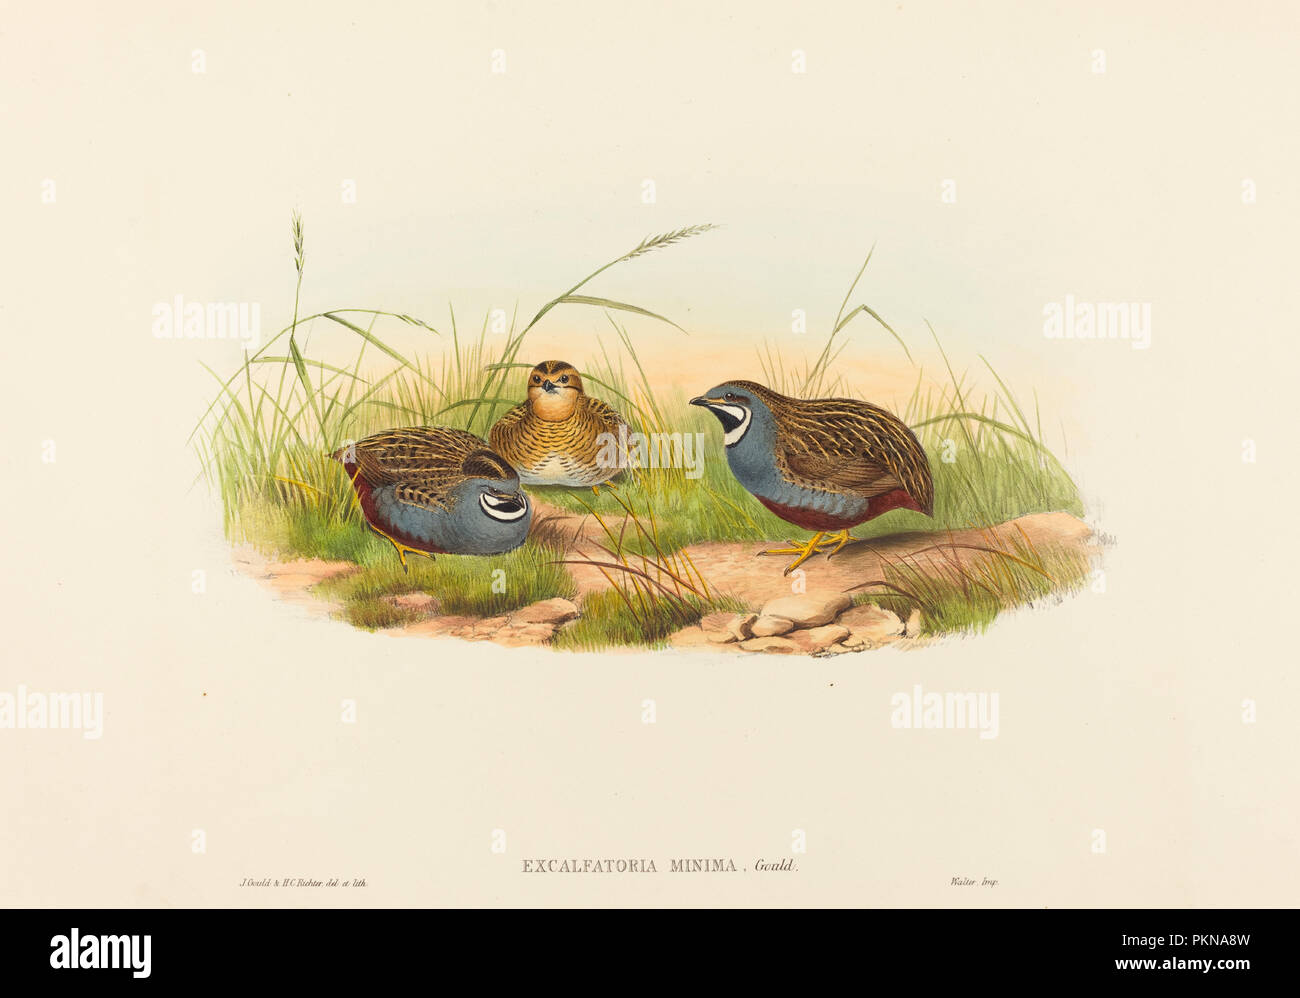 Excalftoria minima (Blue-breasted Quail). Medium: hand-colored lithograph. Museum: National Gallery of Art, Washington DC. Author: John Gould and H. C. Richter. Stock Photo